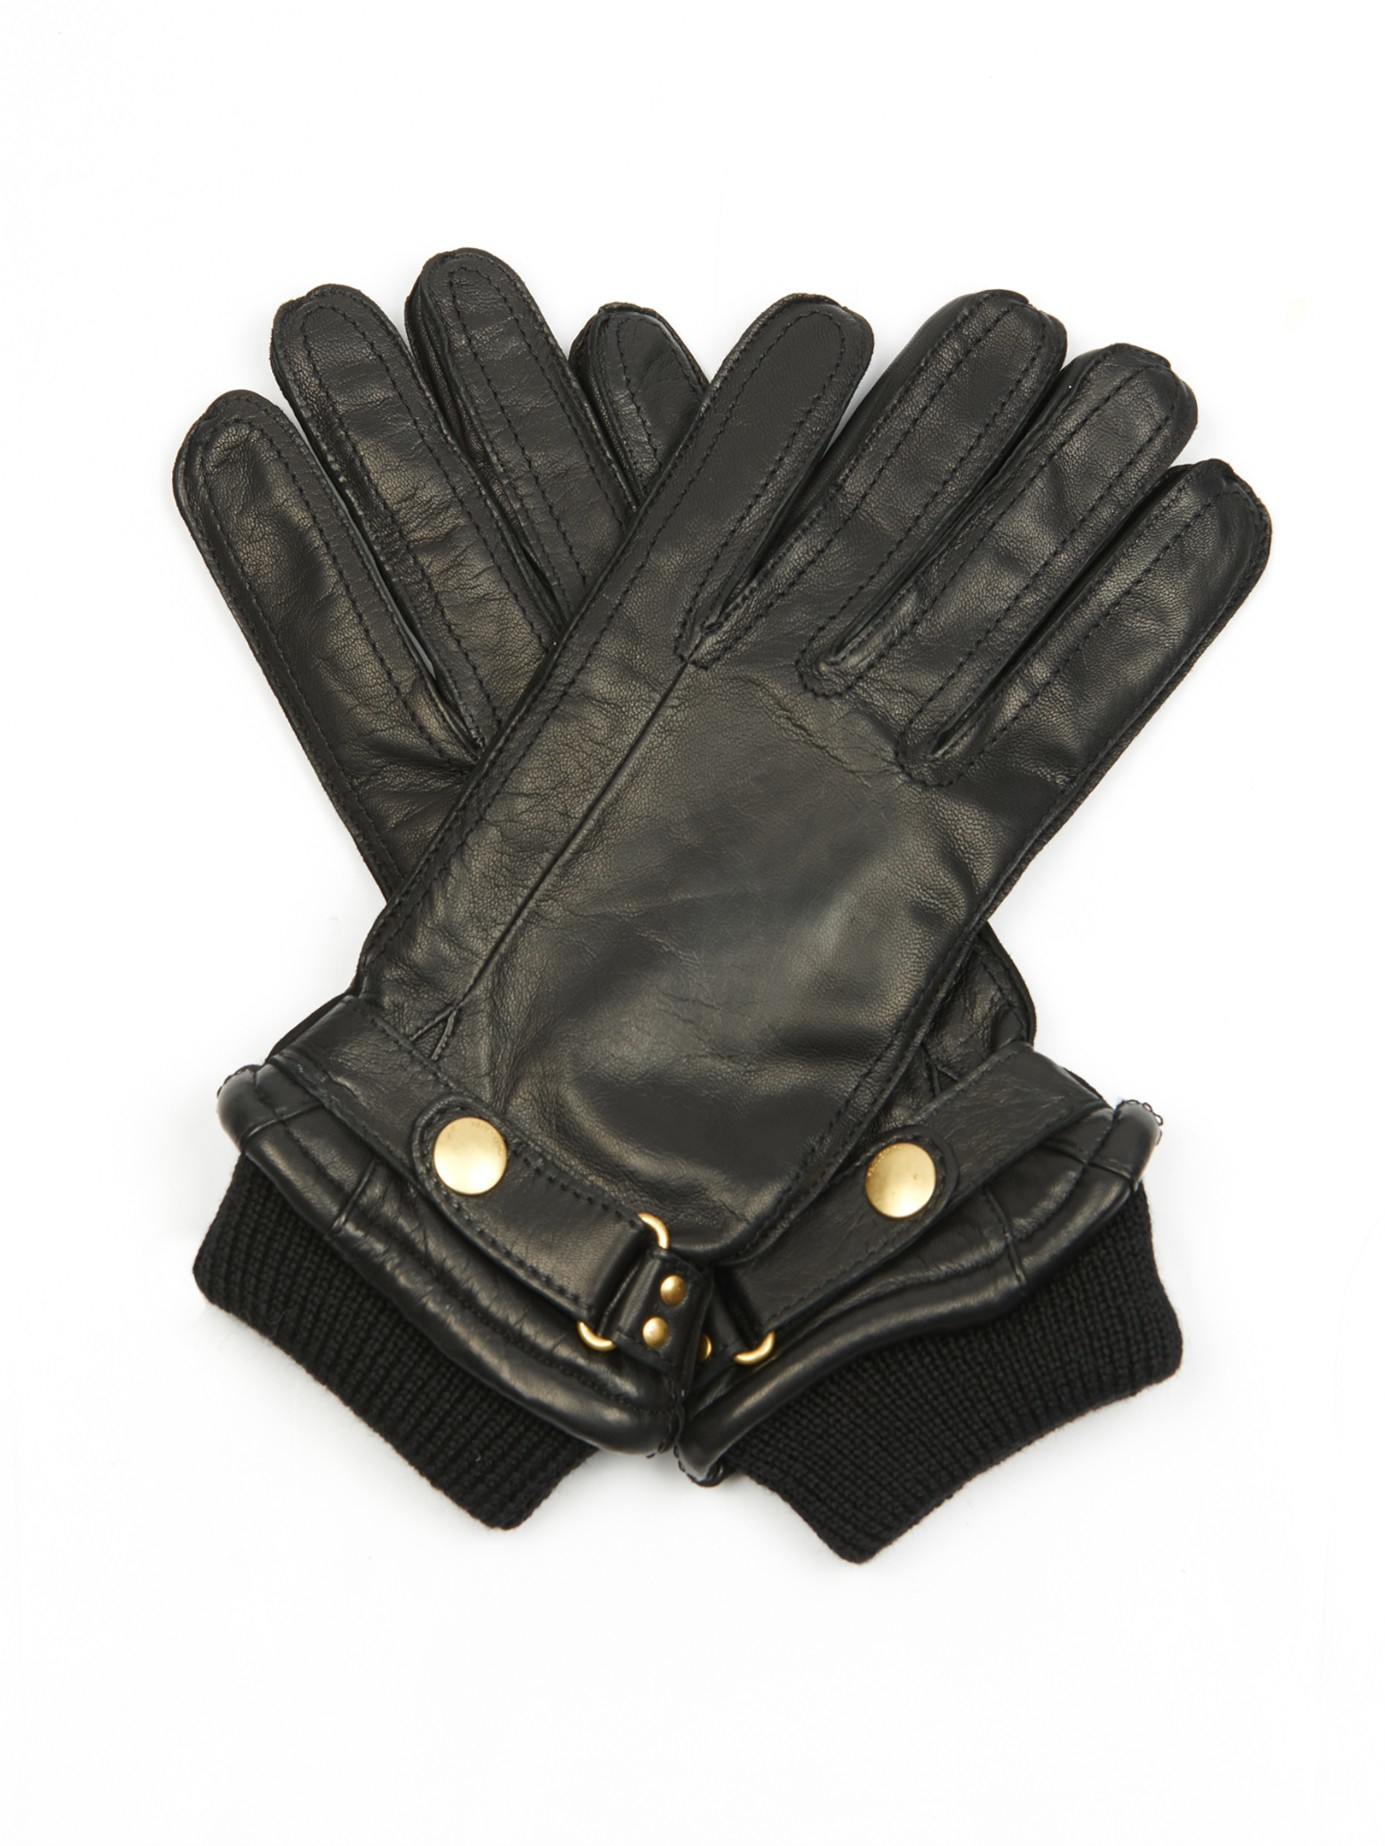 Lyst - Paul smith Wool And Leather Gloves in Black for Men